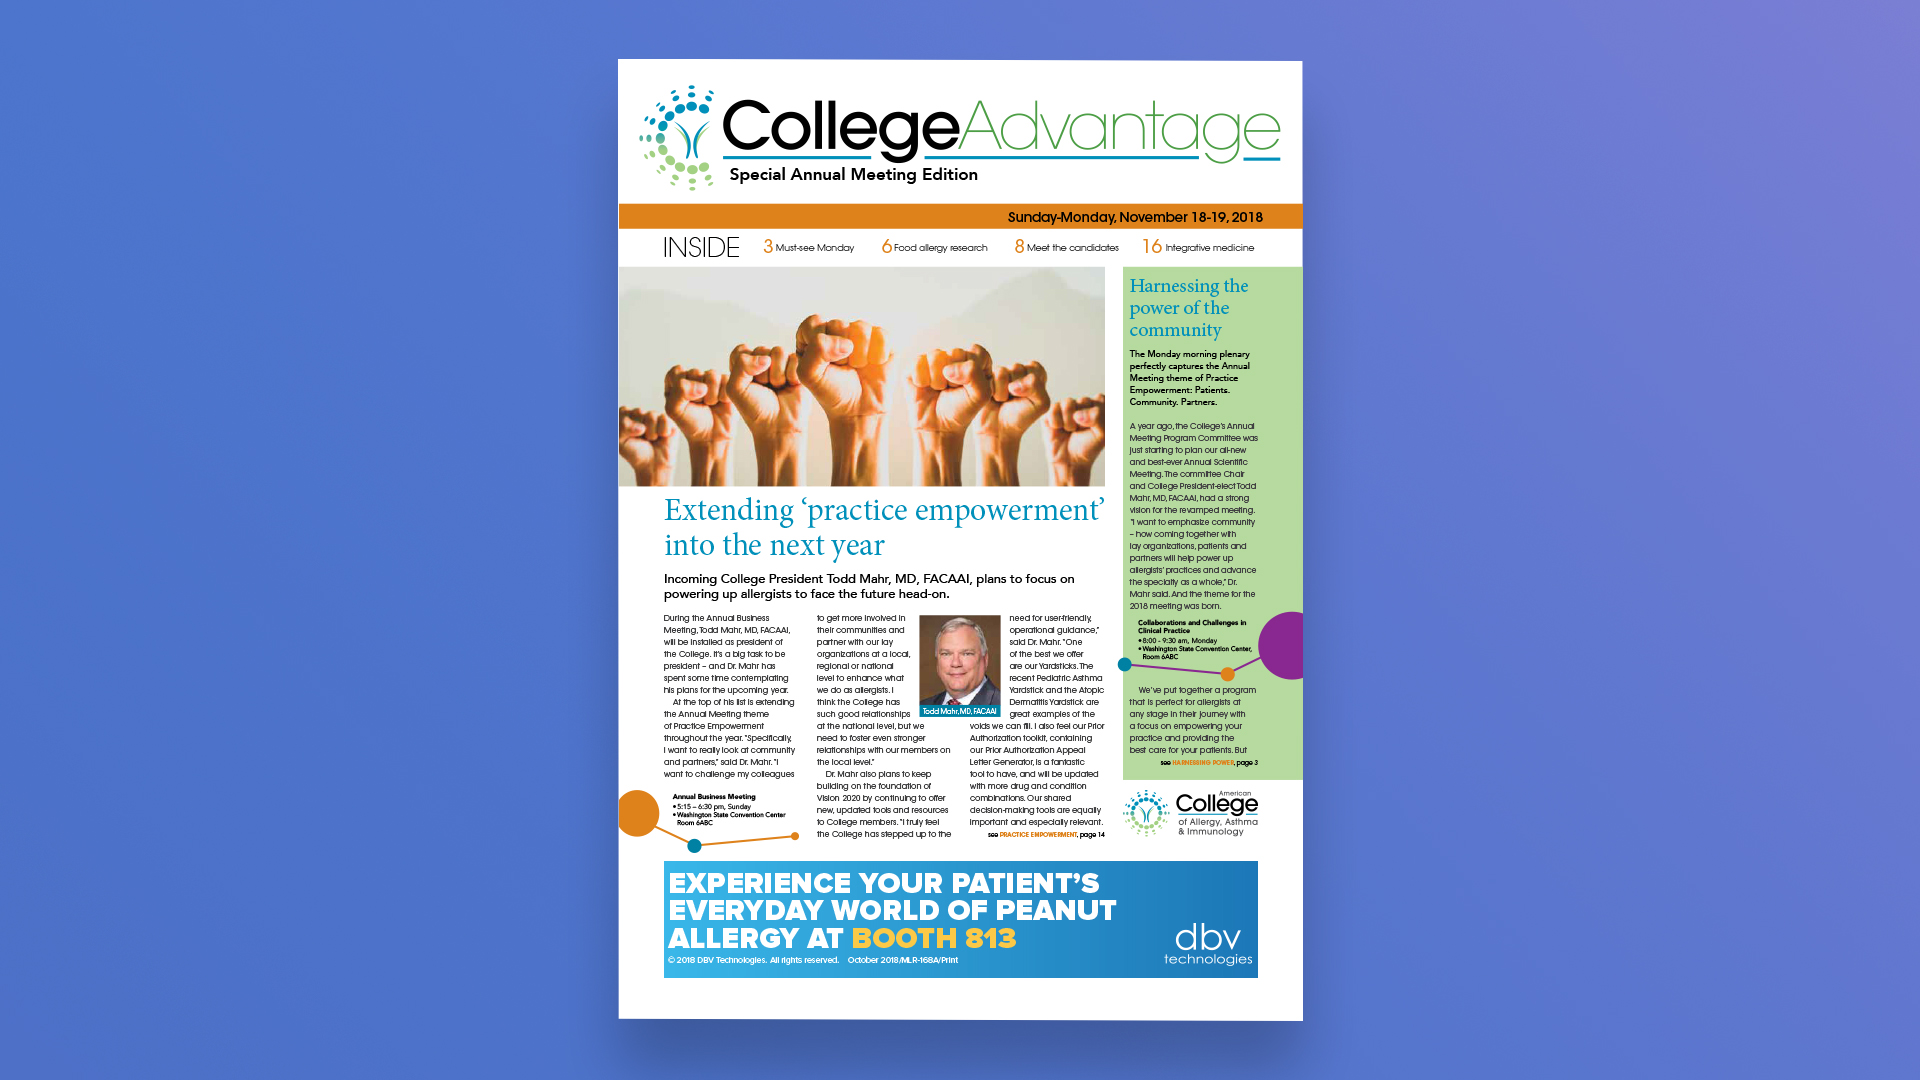 American College of Allergy, Asthma, and Immunology 2017 - College Advantage Daily